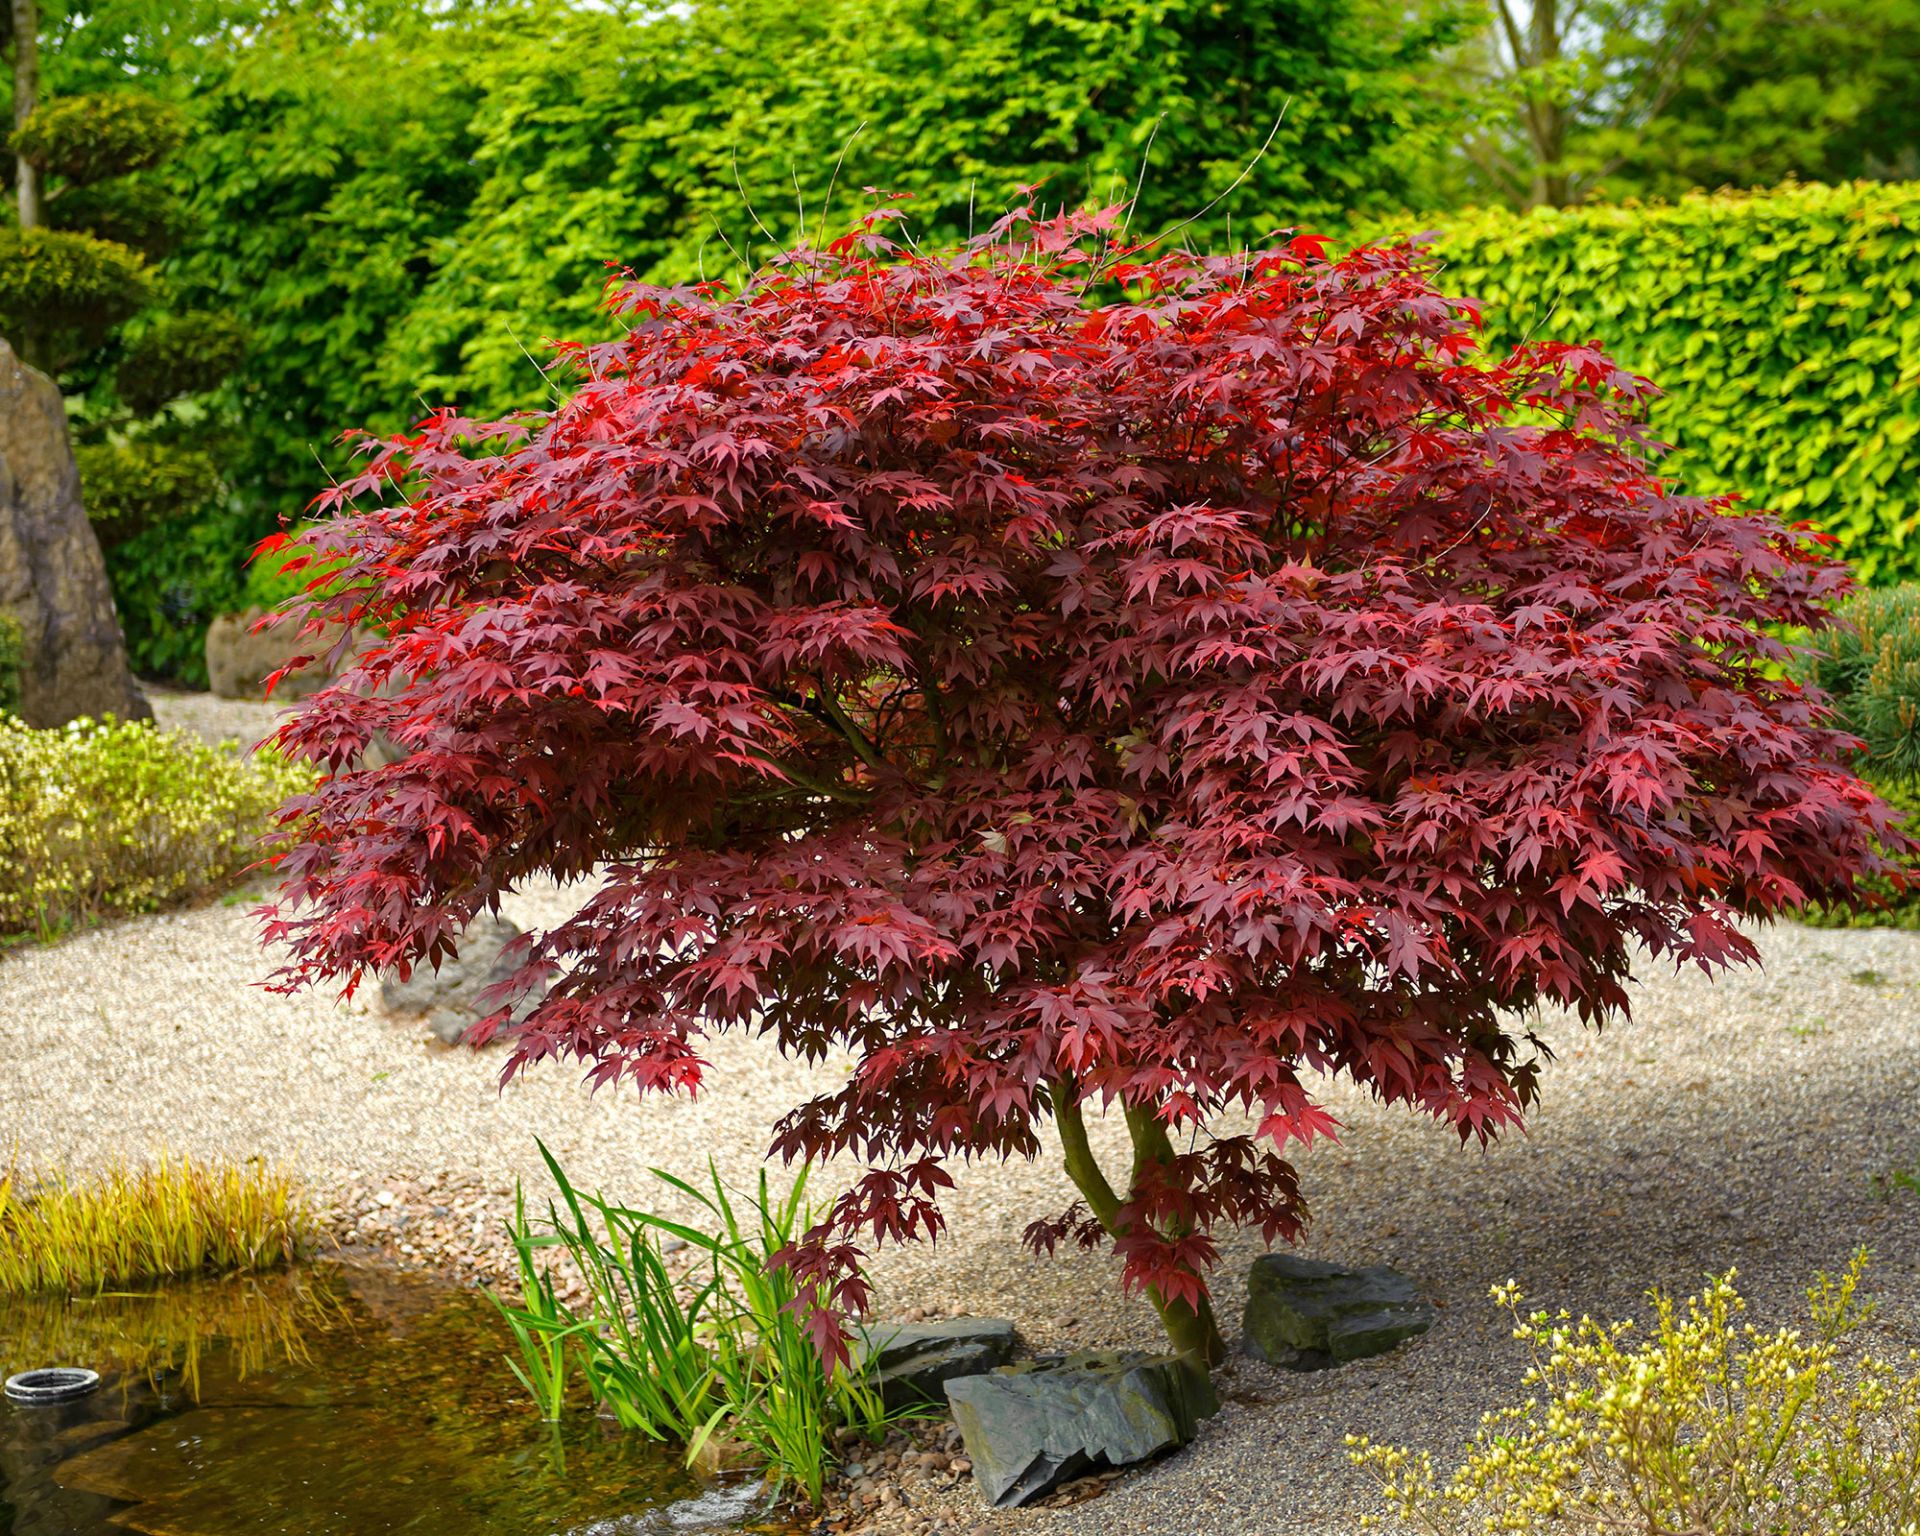 Best backyard trees: 10 choices for yards big or small.